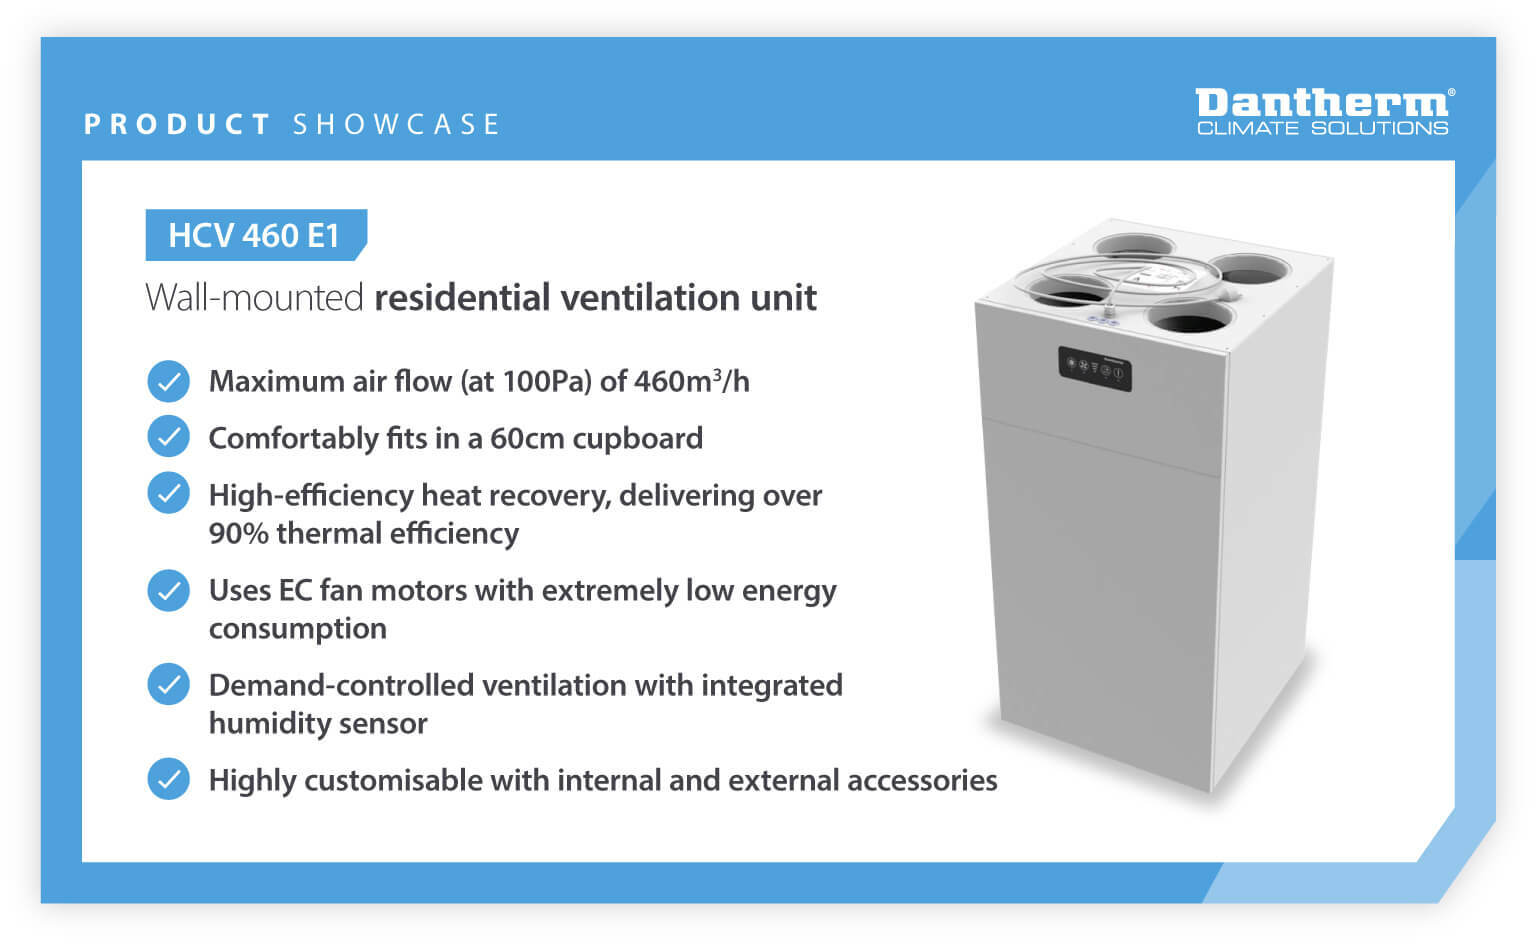 Product showcase for Dantherm wall mounted residential ventilation unit HCV 460 E1 showing features and benefits - Infographic image